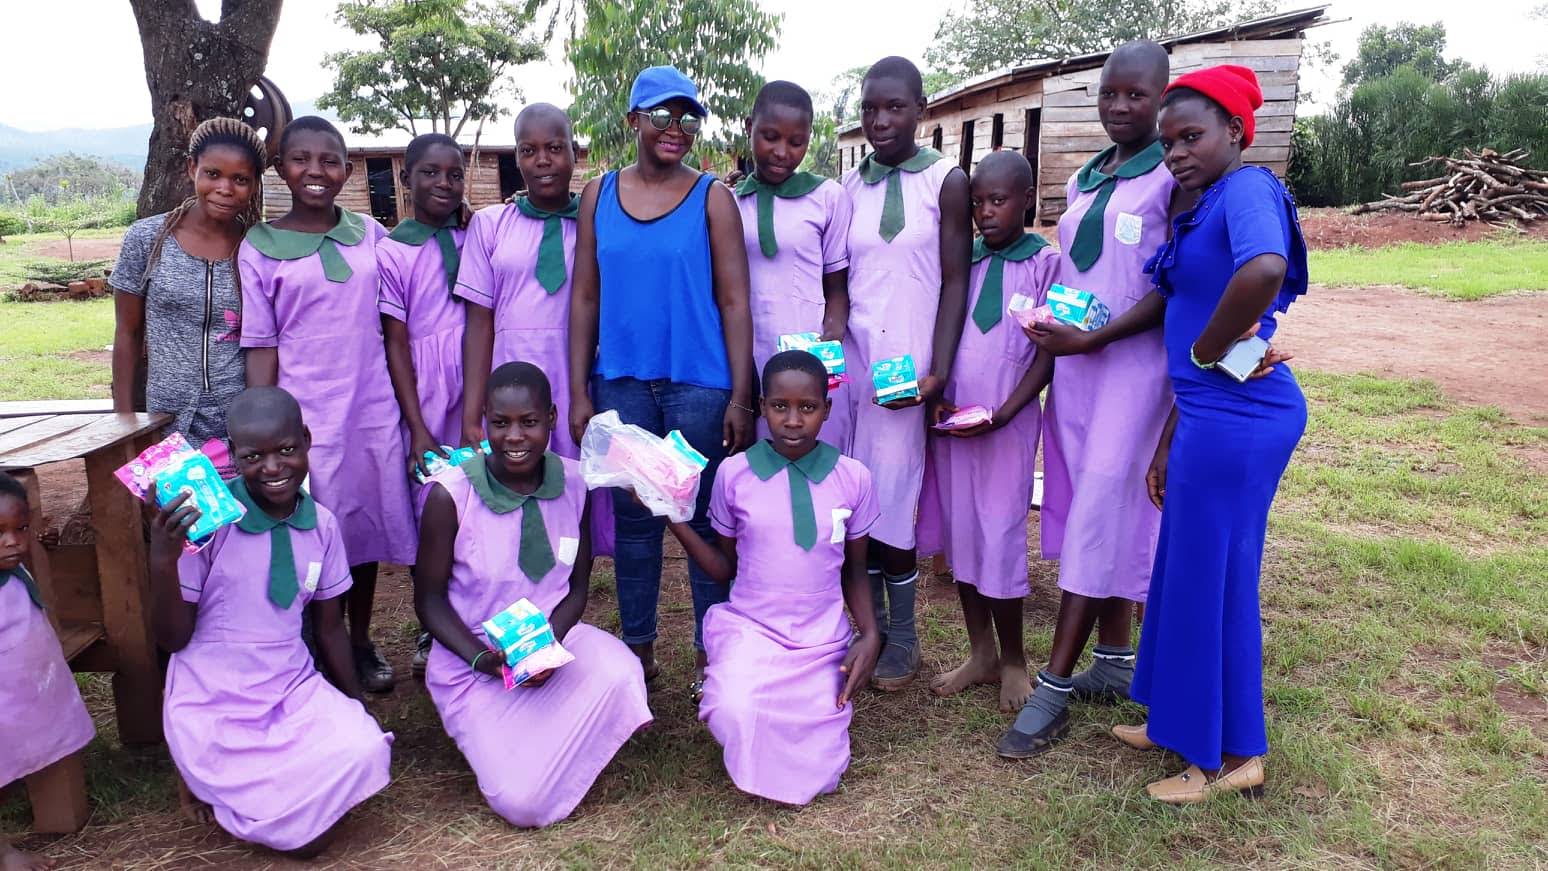 Visit to Starlight Family School to Provide Sanitary Towels